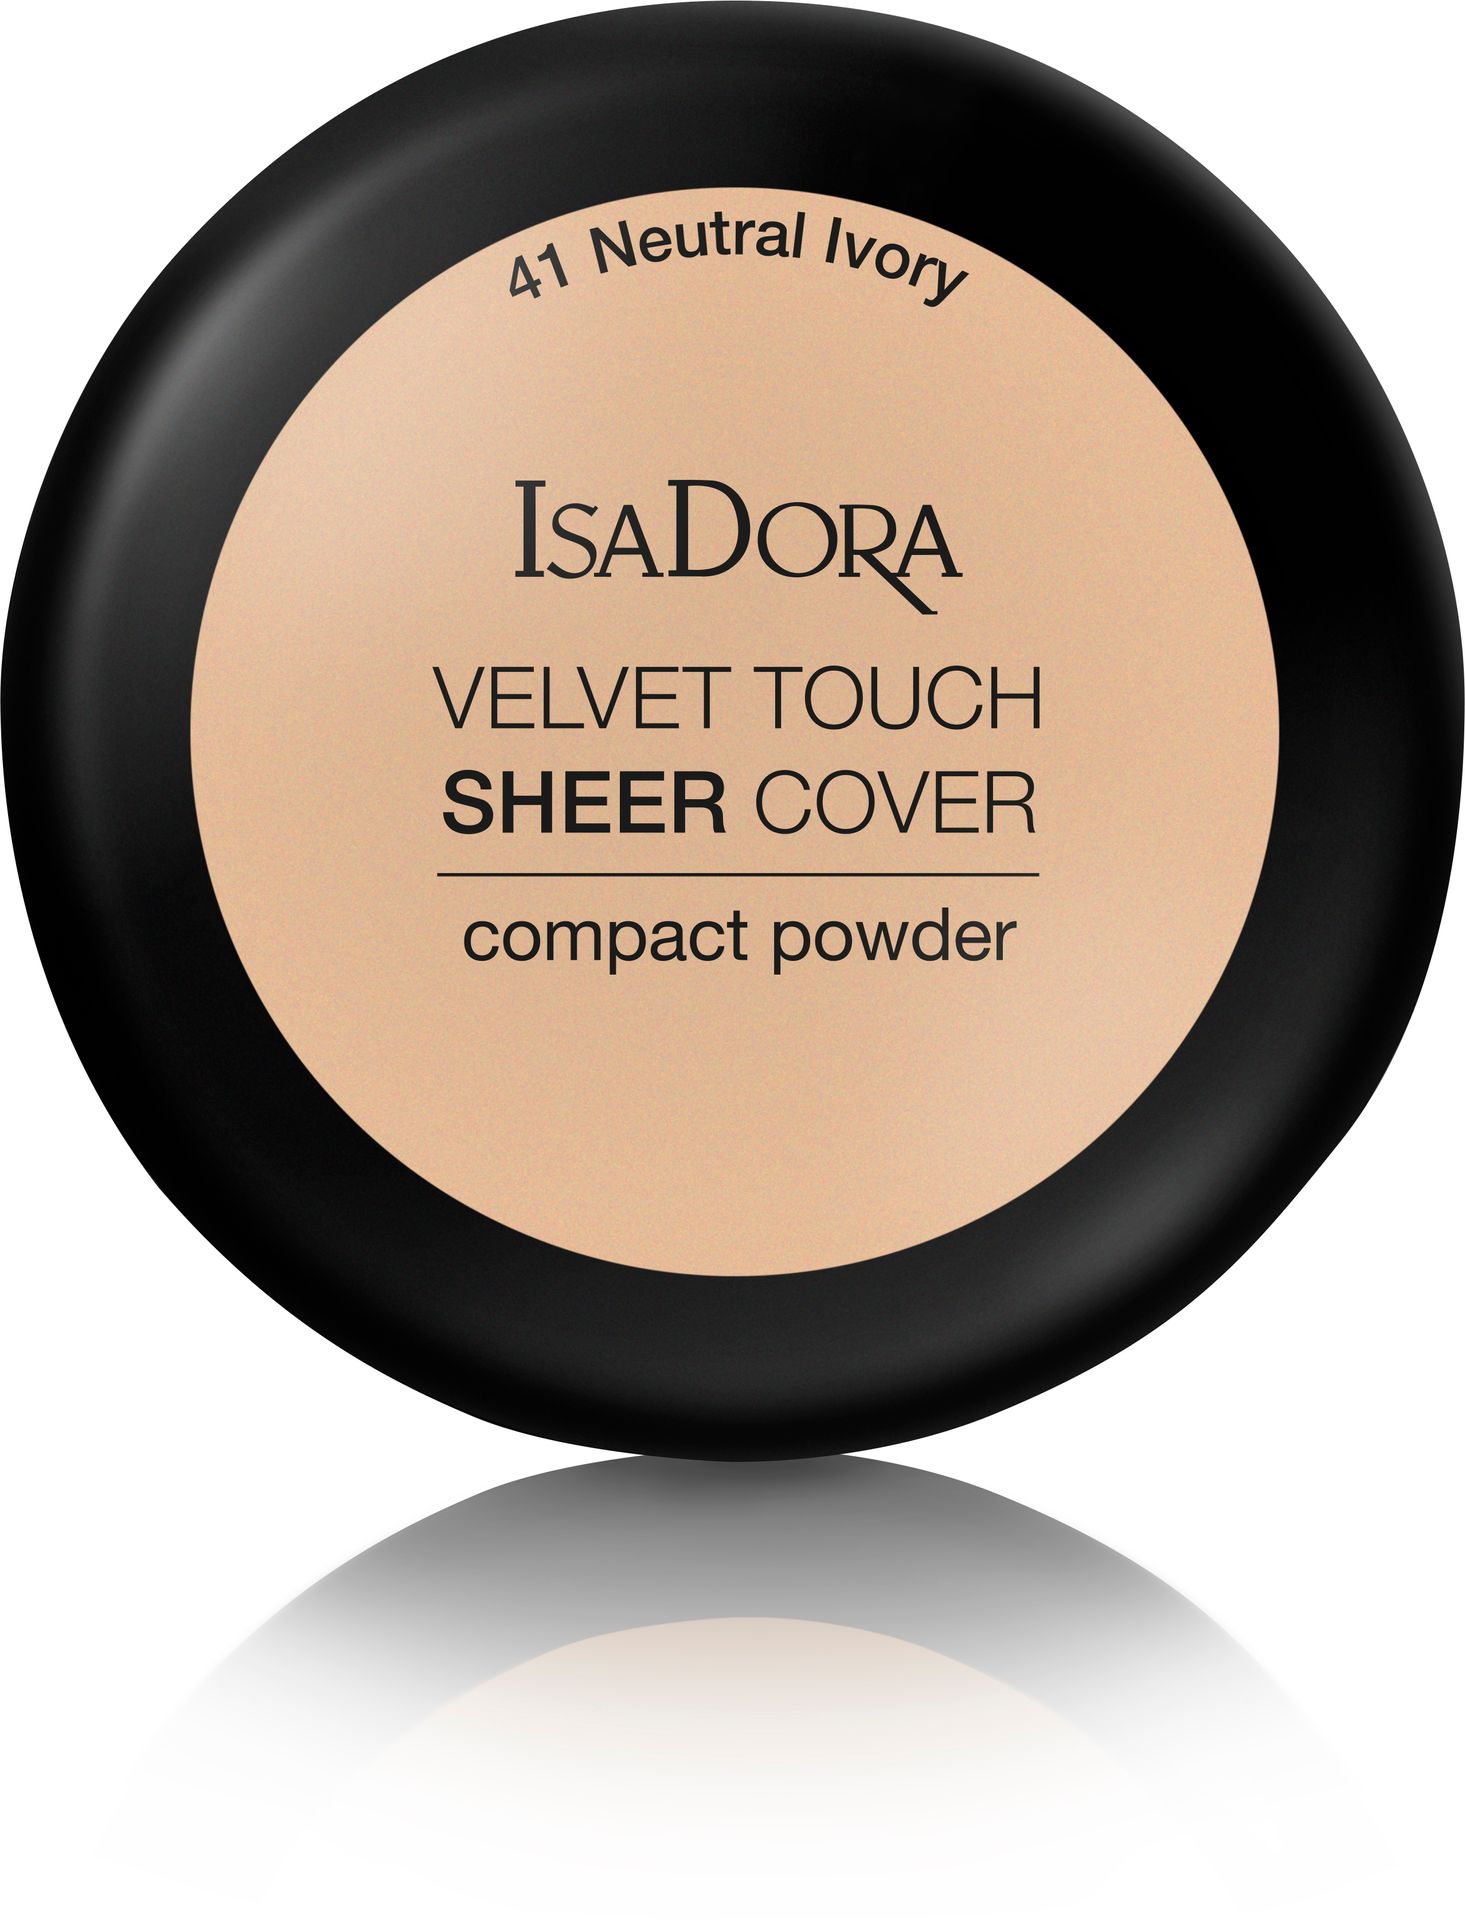 IsaDora Velvet Touch Sheer Cover Compact Powder 41 Neutral Ivory - Puder w kompakcie 7,5g